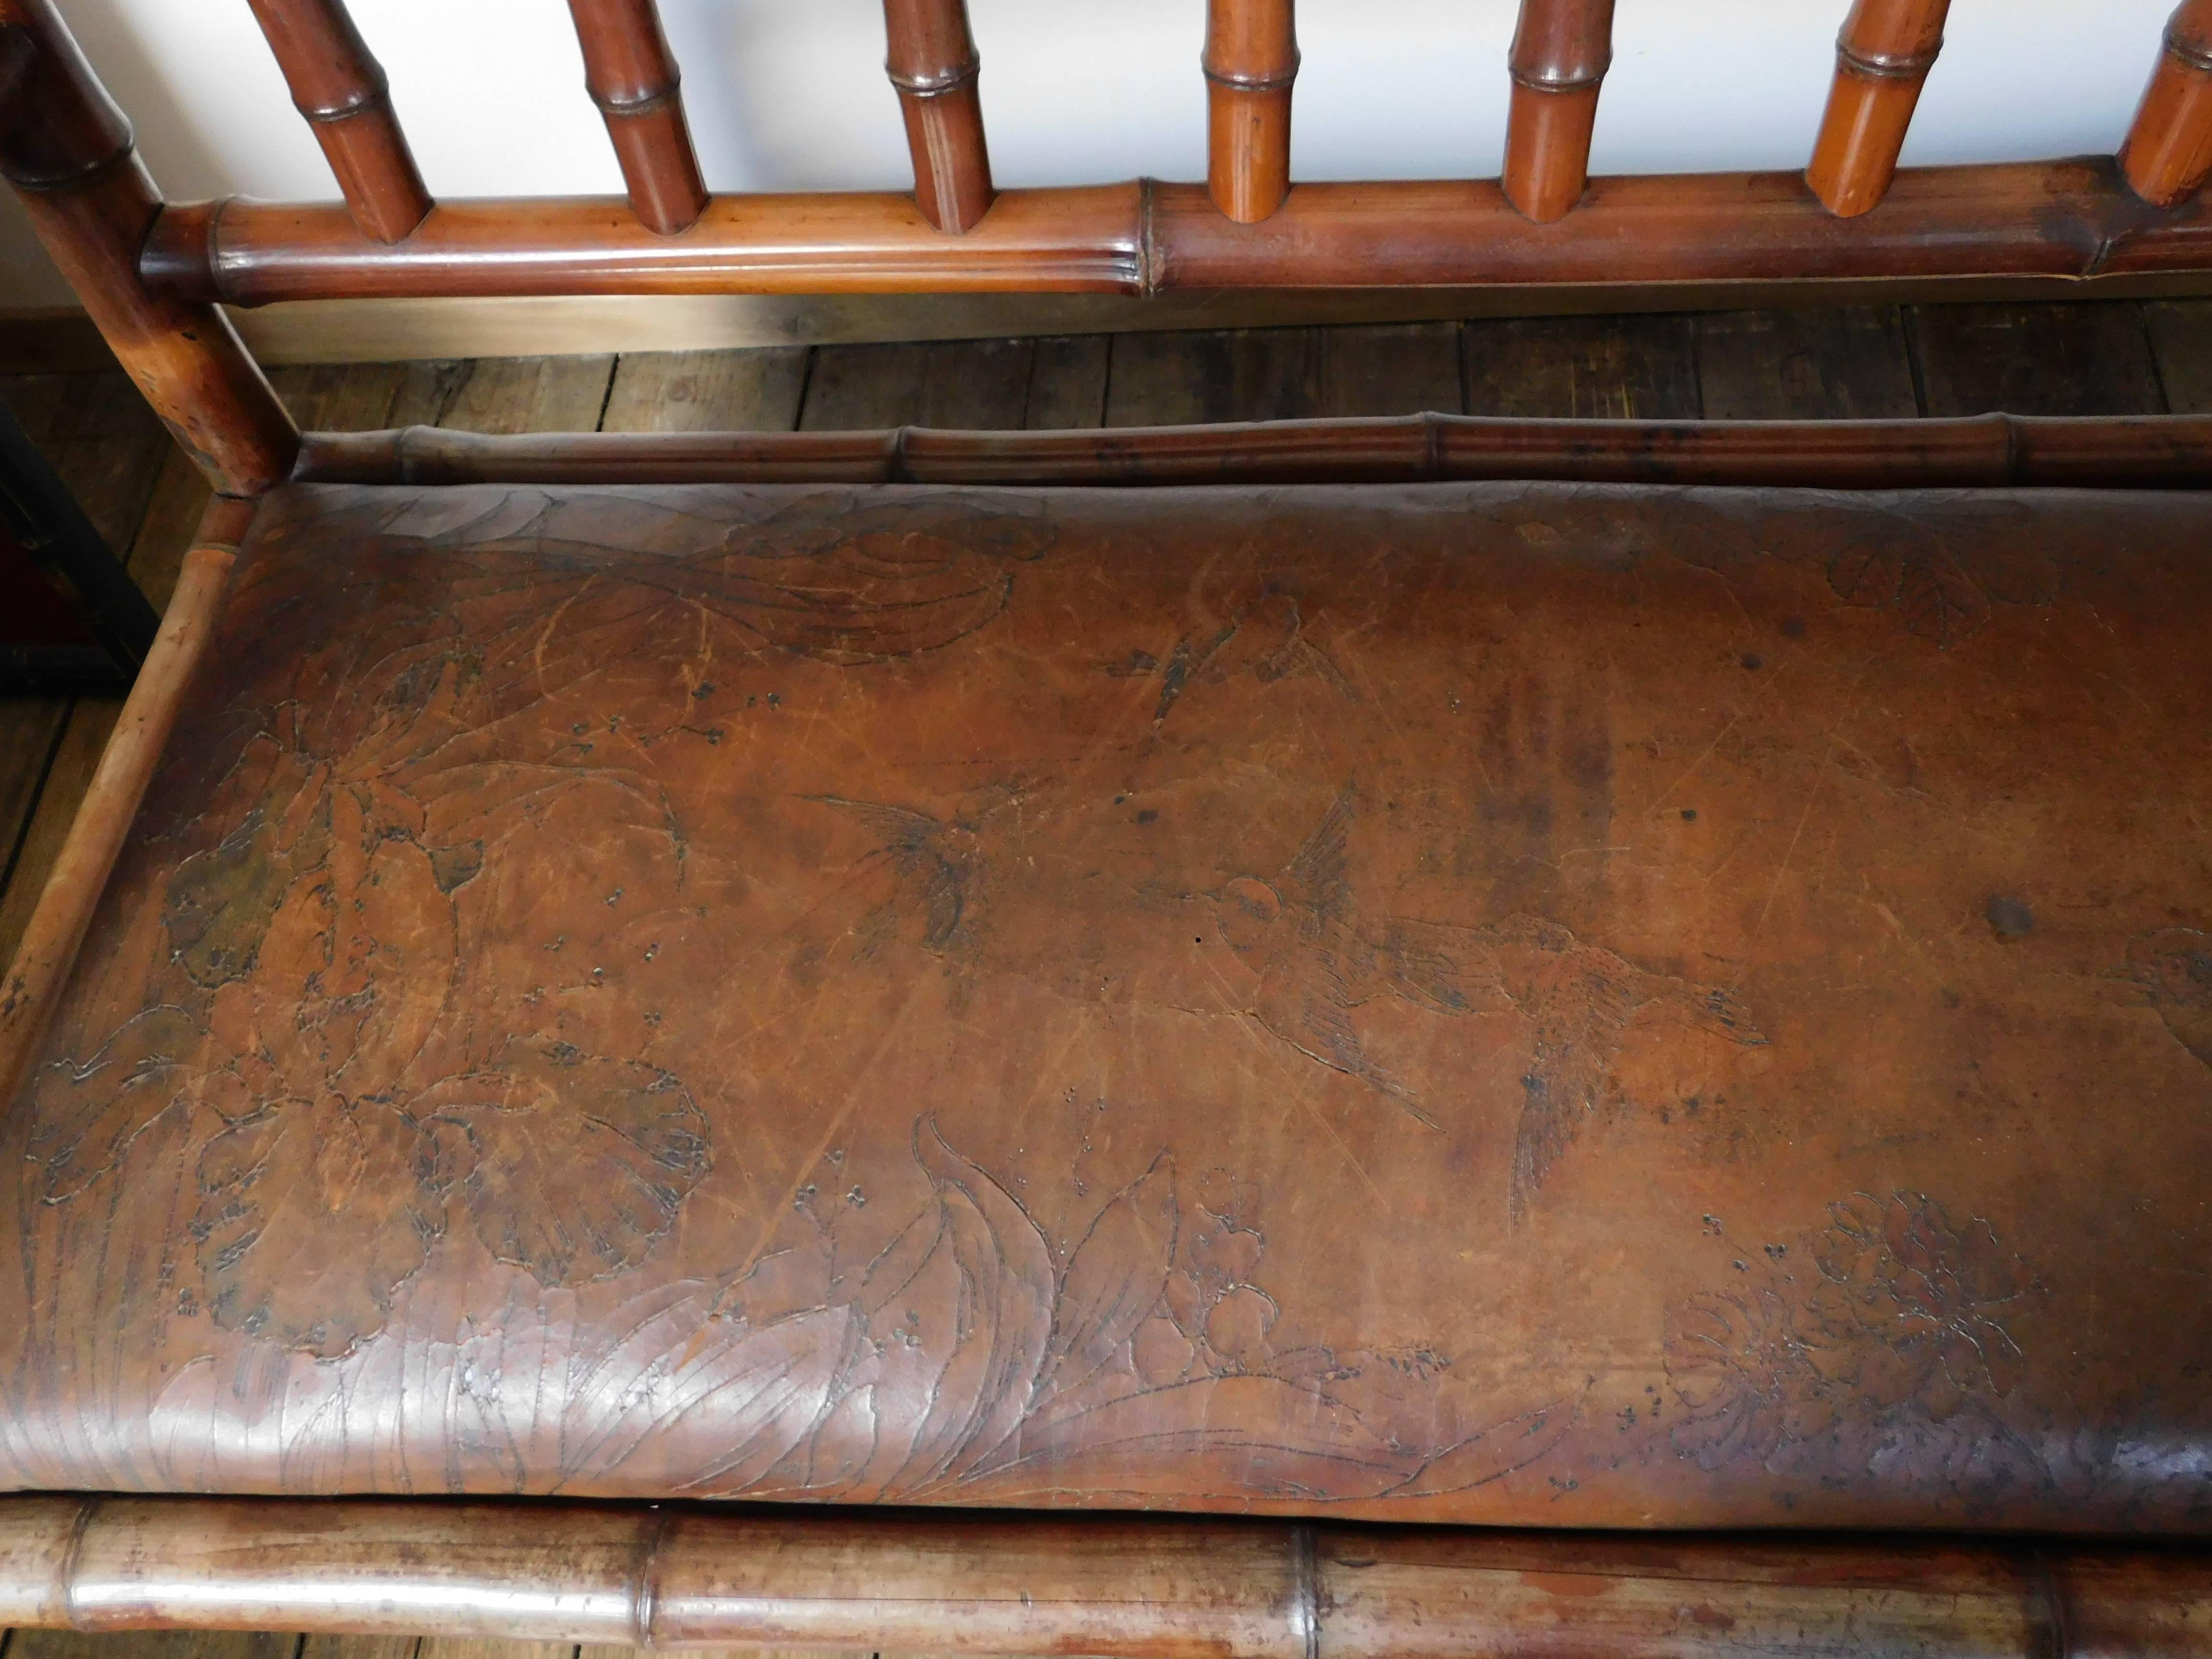 19th Century Perret Vibert Bamboo Settee with Decorated Leather Upholstery For Sale 5